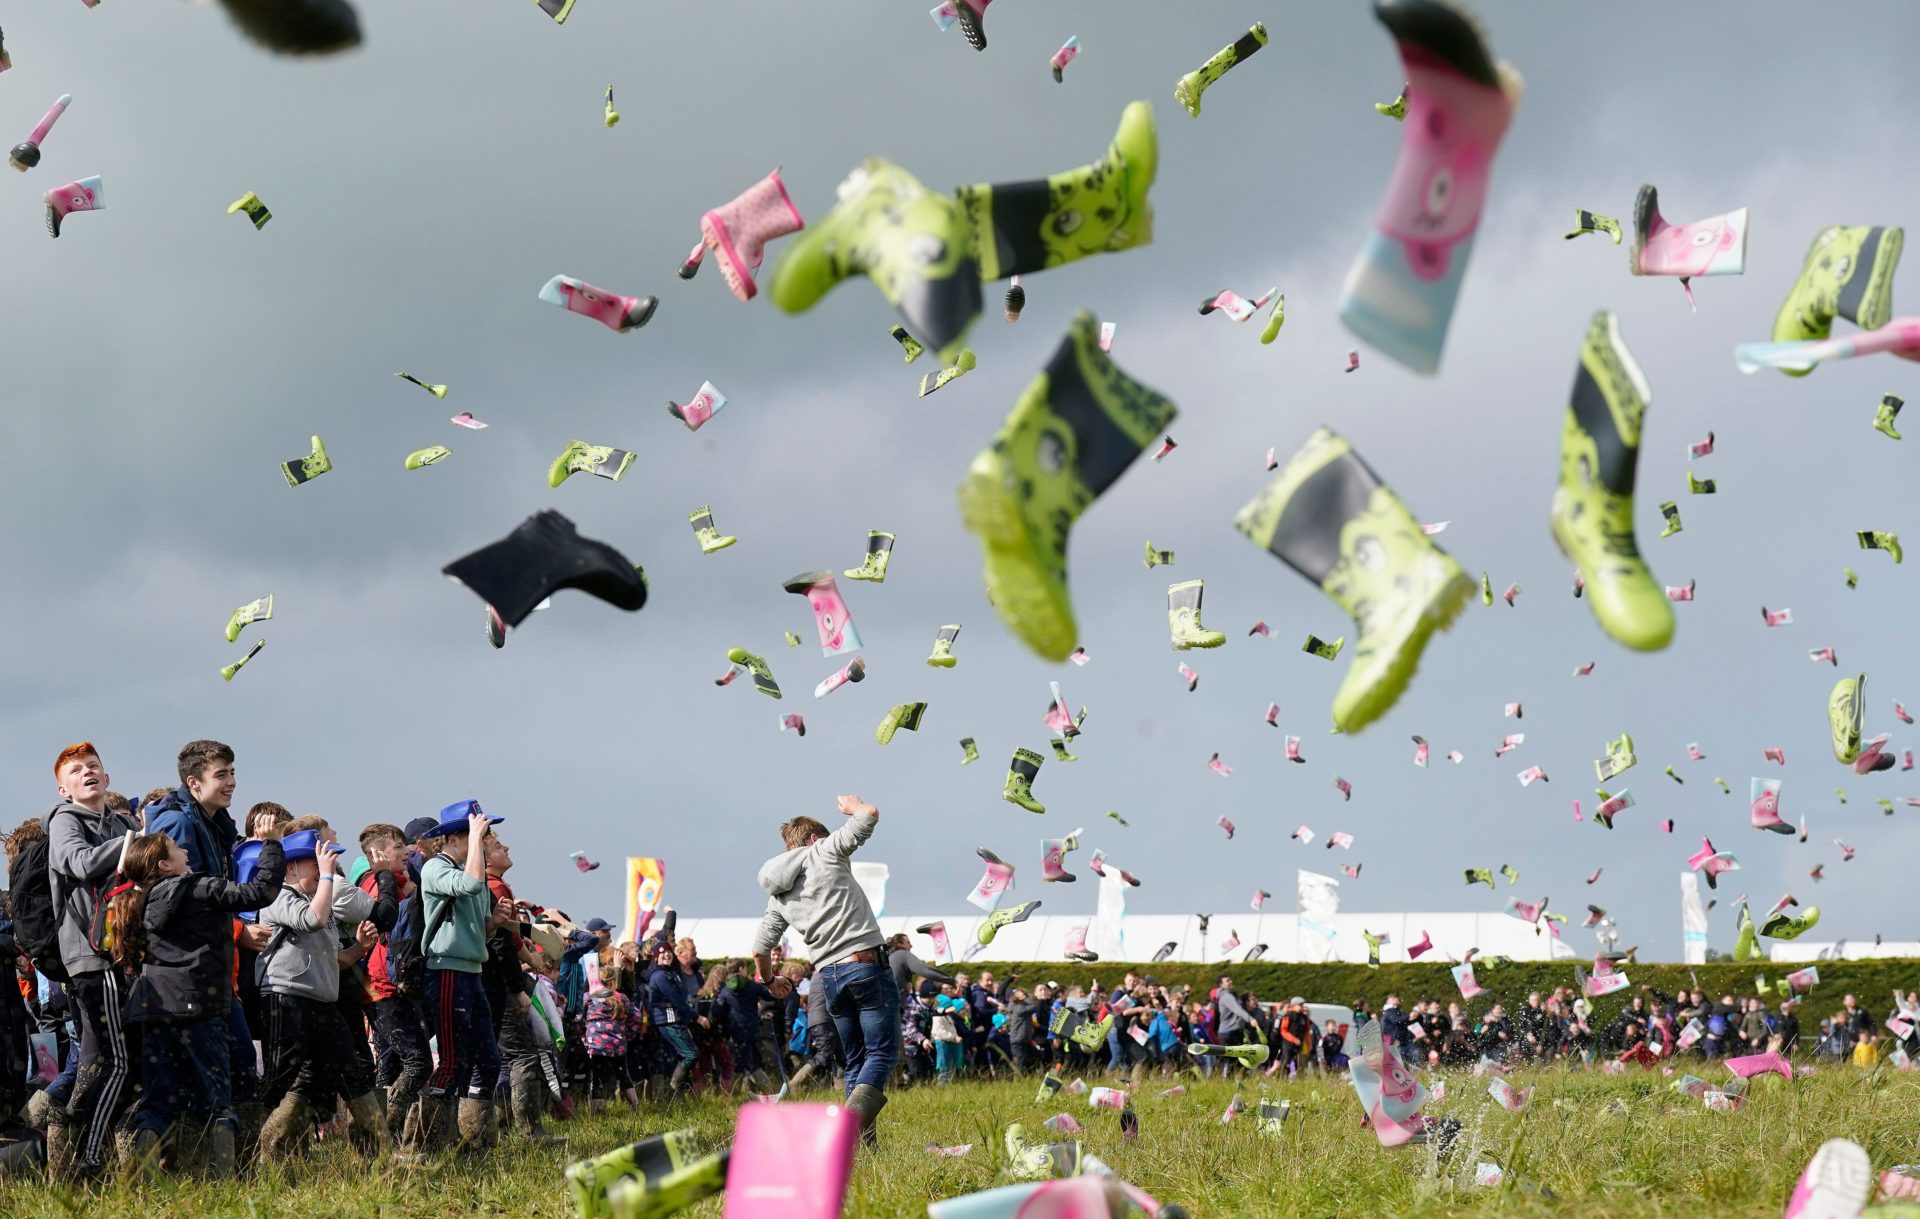 955 people take part in a Guinness World Record attempt at the most people throwing wellies September 20, 2023 (PA Images / Alamy Stock Photo)